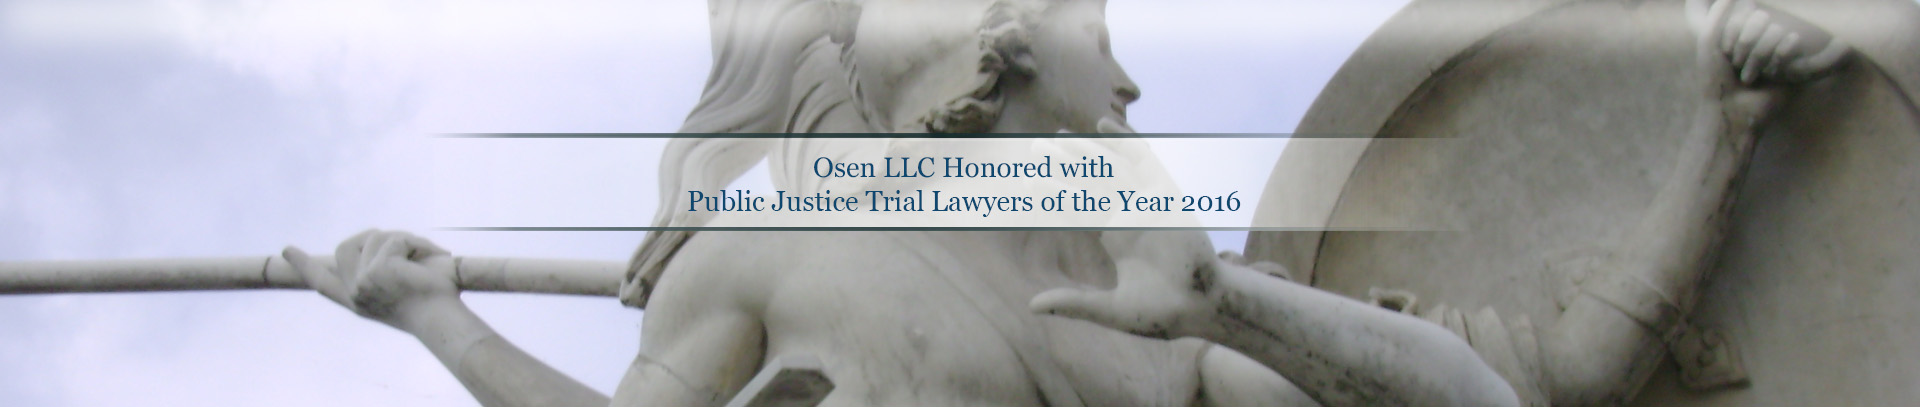 Osen LLC Honored with Public Justice Trial Lawyers of the Year 2016